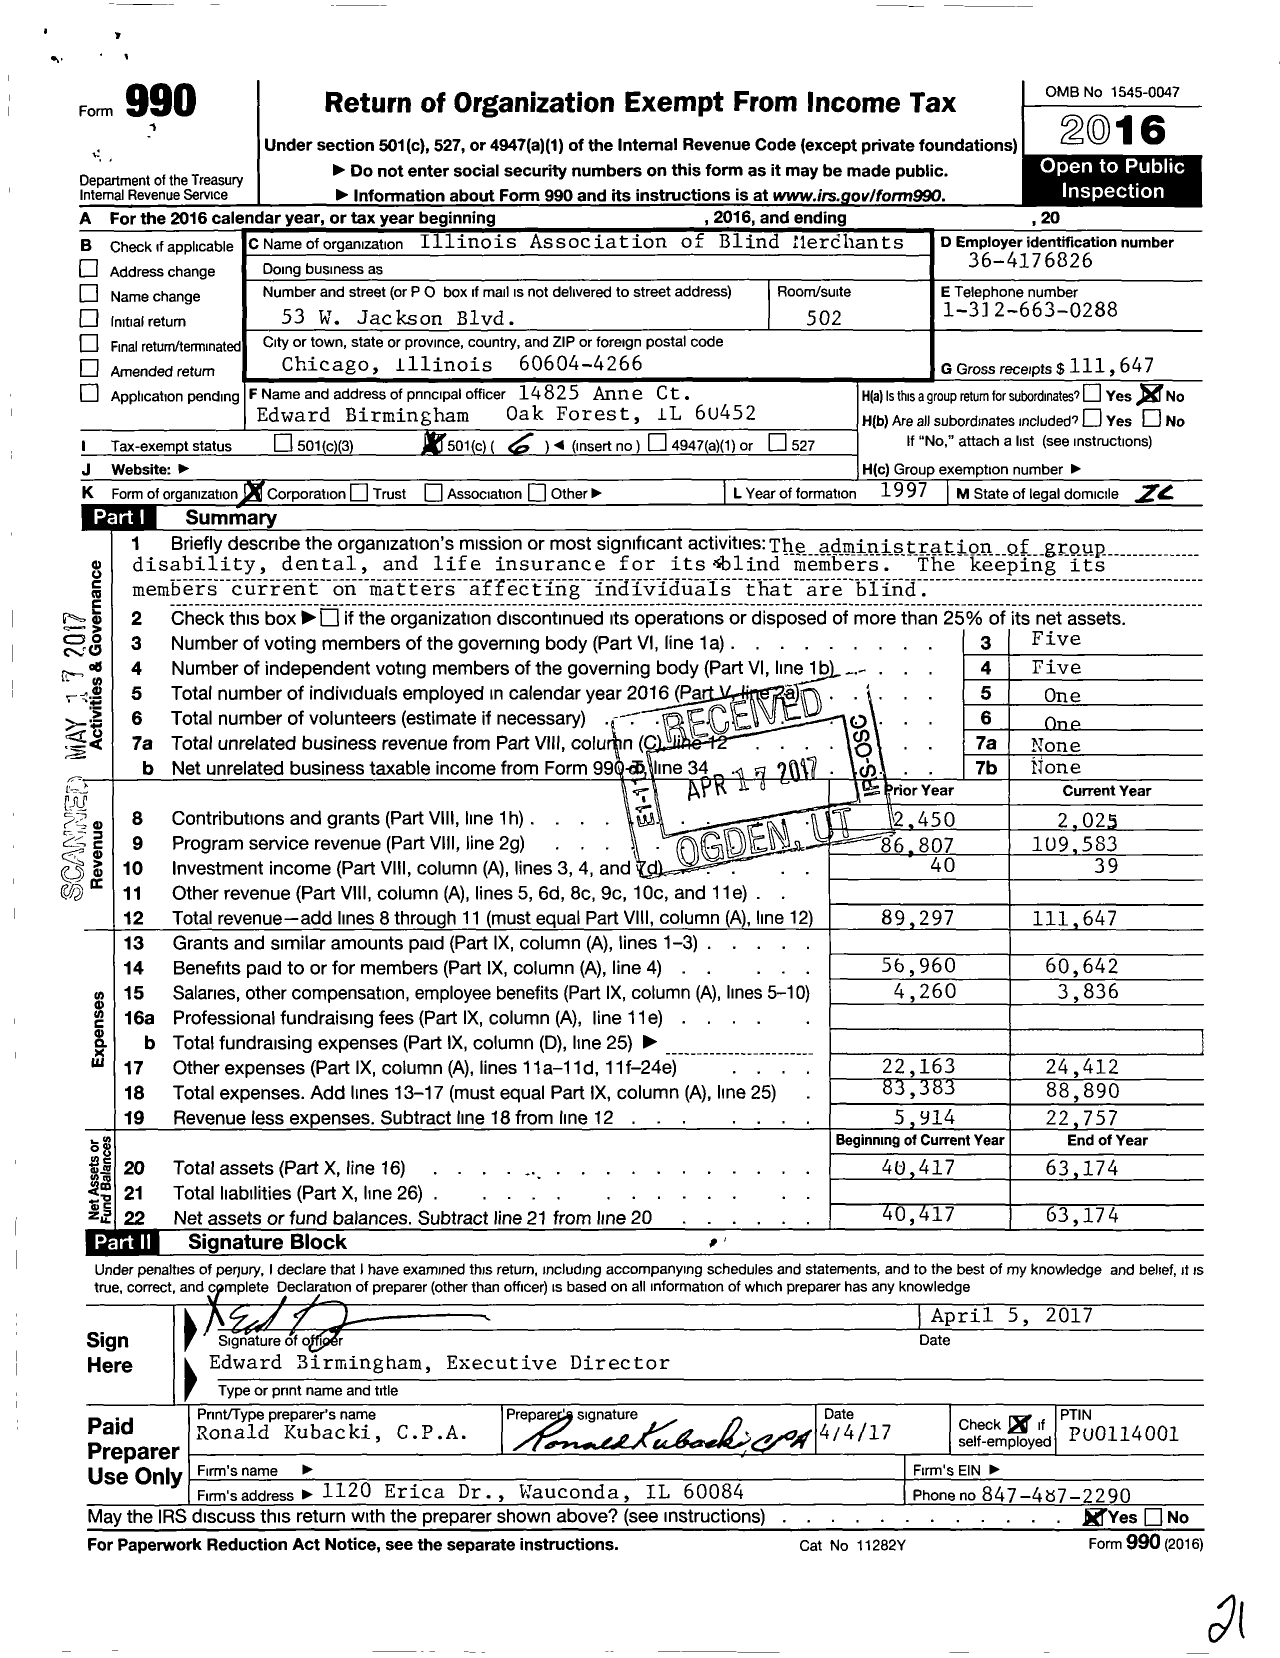 Image of first page of 2016 Form 990O for Illinois Association of Blind Merchants